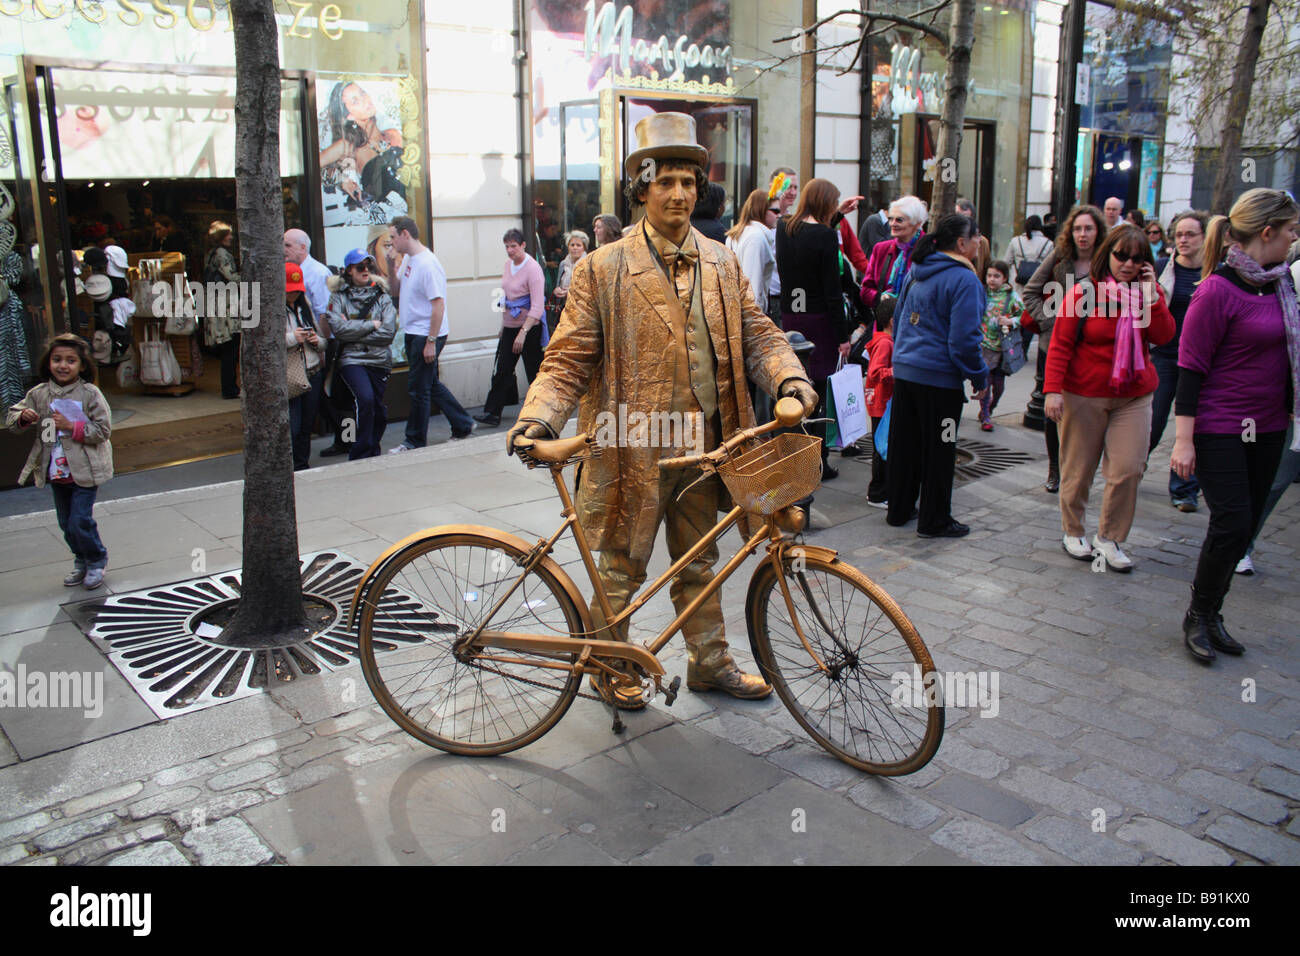 Bronze man human statue street performer with bicycle Covent Garden. Stock Photo